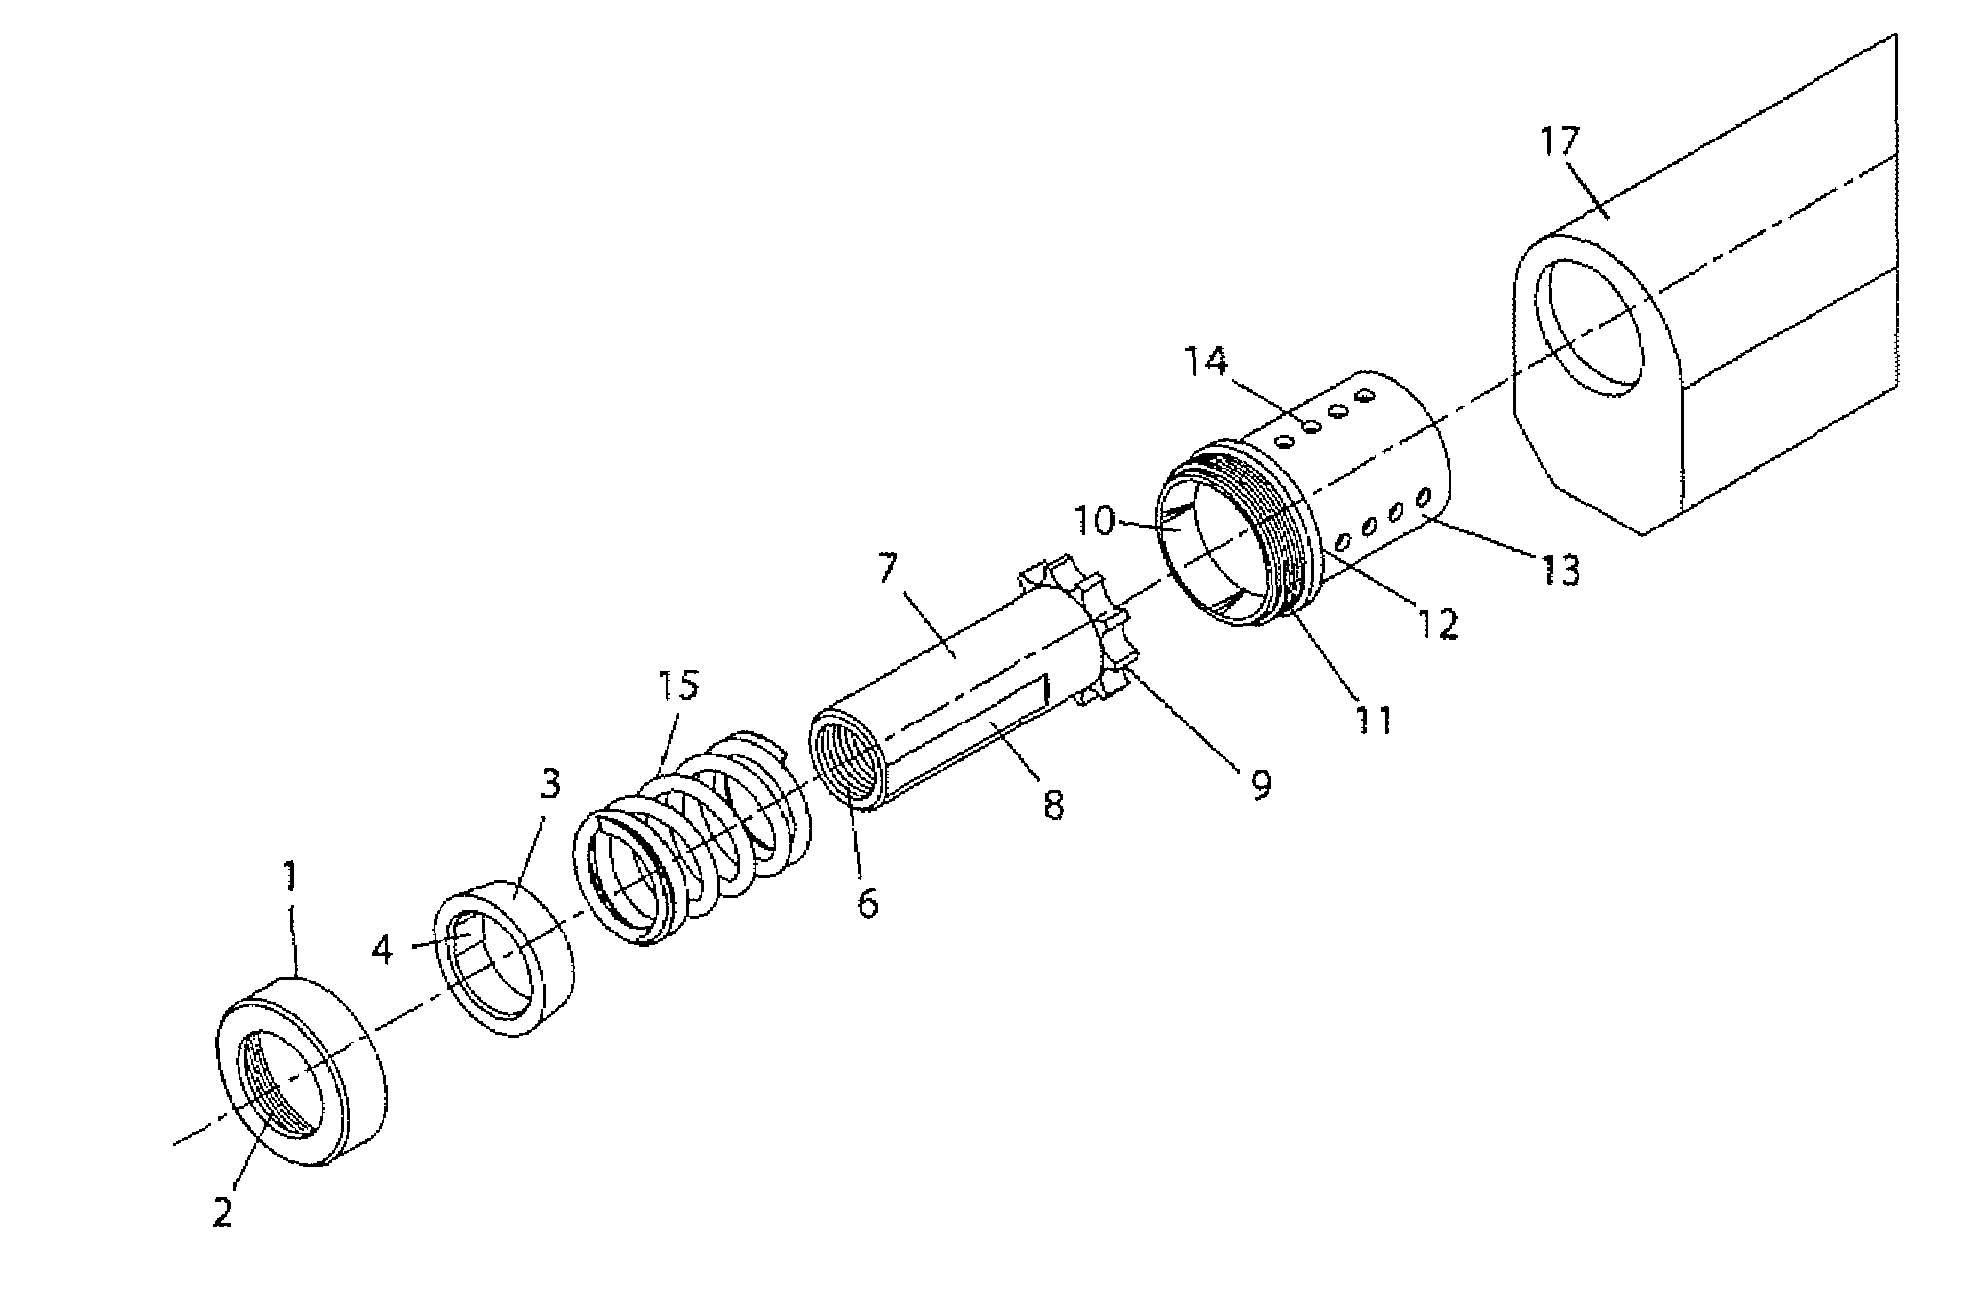 Orientation apparatus for eccentric firearm noise suppressor and assembly method